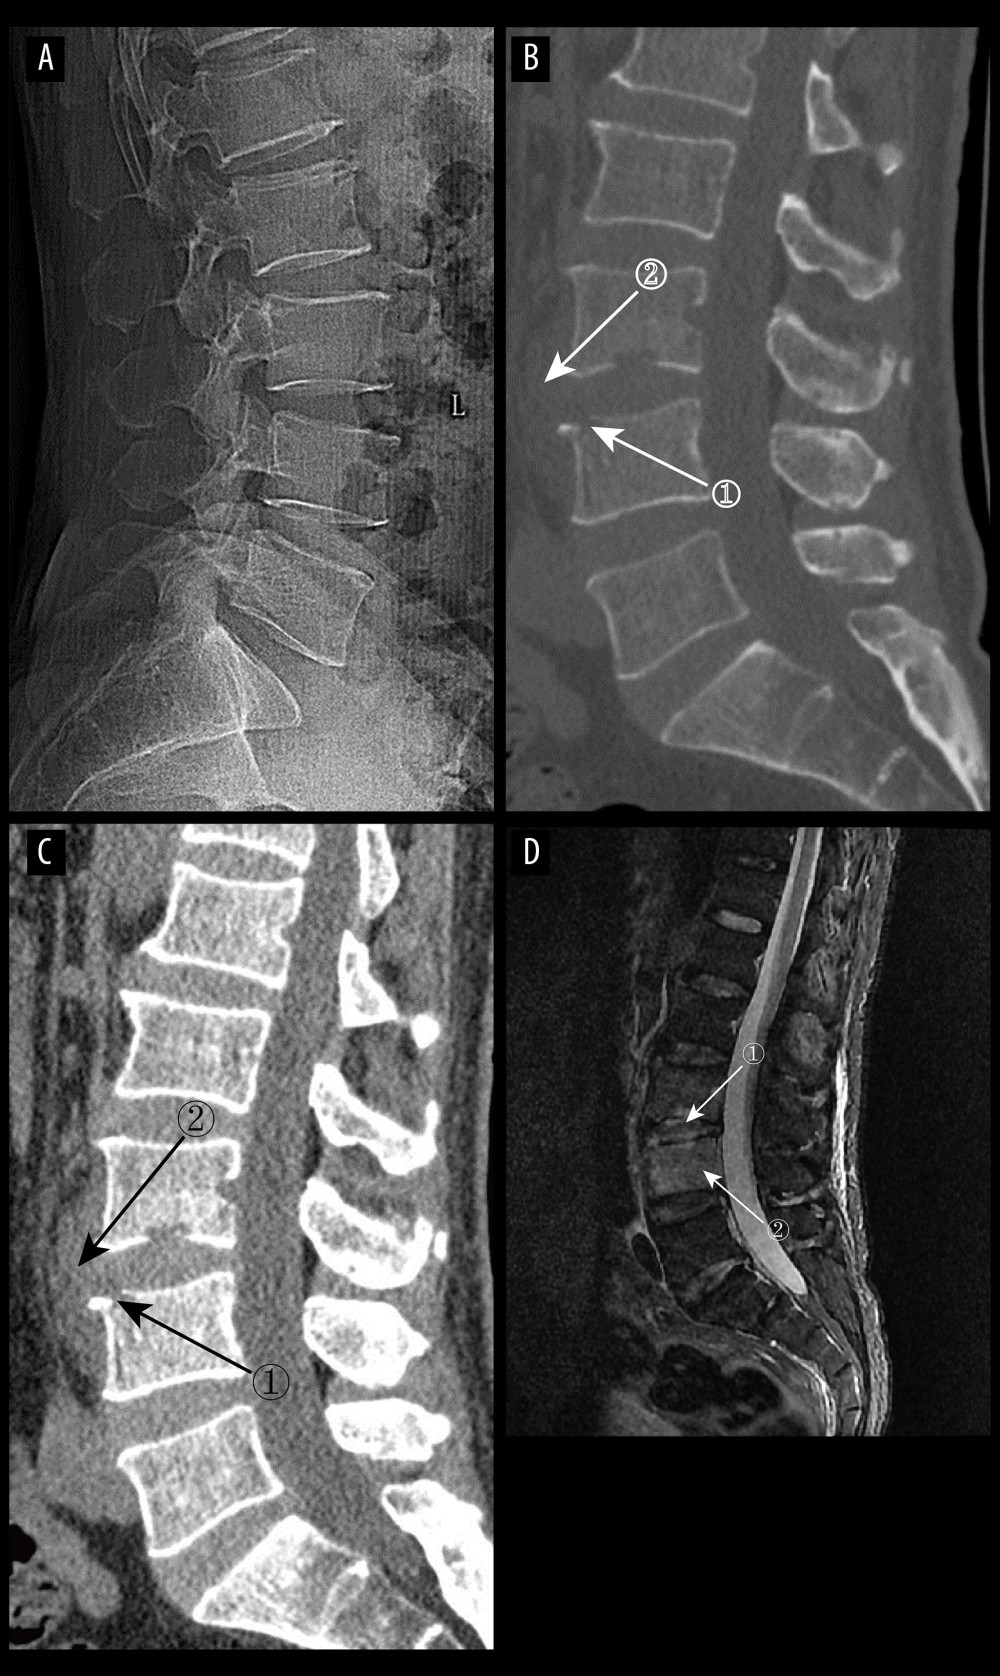 (A) pyogenic spondylitis (PS) early plain radiograph. No significant narrowing of the lumbar spinal space was seen. (A–D) Images of the same patient, who presented with 9 days of low back pain. (B, C) Plain and enhanced computed tomography in early PS. Marker 1 in both images shows poorly defined bony margins on the anterosuperior margin of the L4 vertebral body, and marker 2 shows swelling of the surrounding soft tissues (D) Magnetic resonance imaging in early stages of PS. Marker 1 shows disc erosion, and marker 2 shows diffuse infection of the L4 vertebral body (Adobe Illustrator 2022. 26.5. Adobe Inc.).